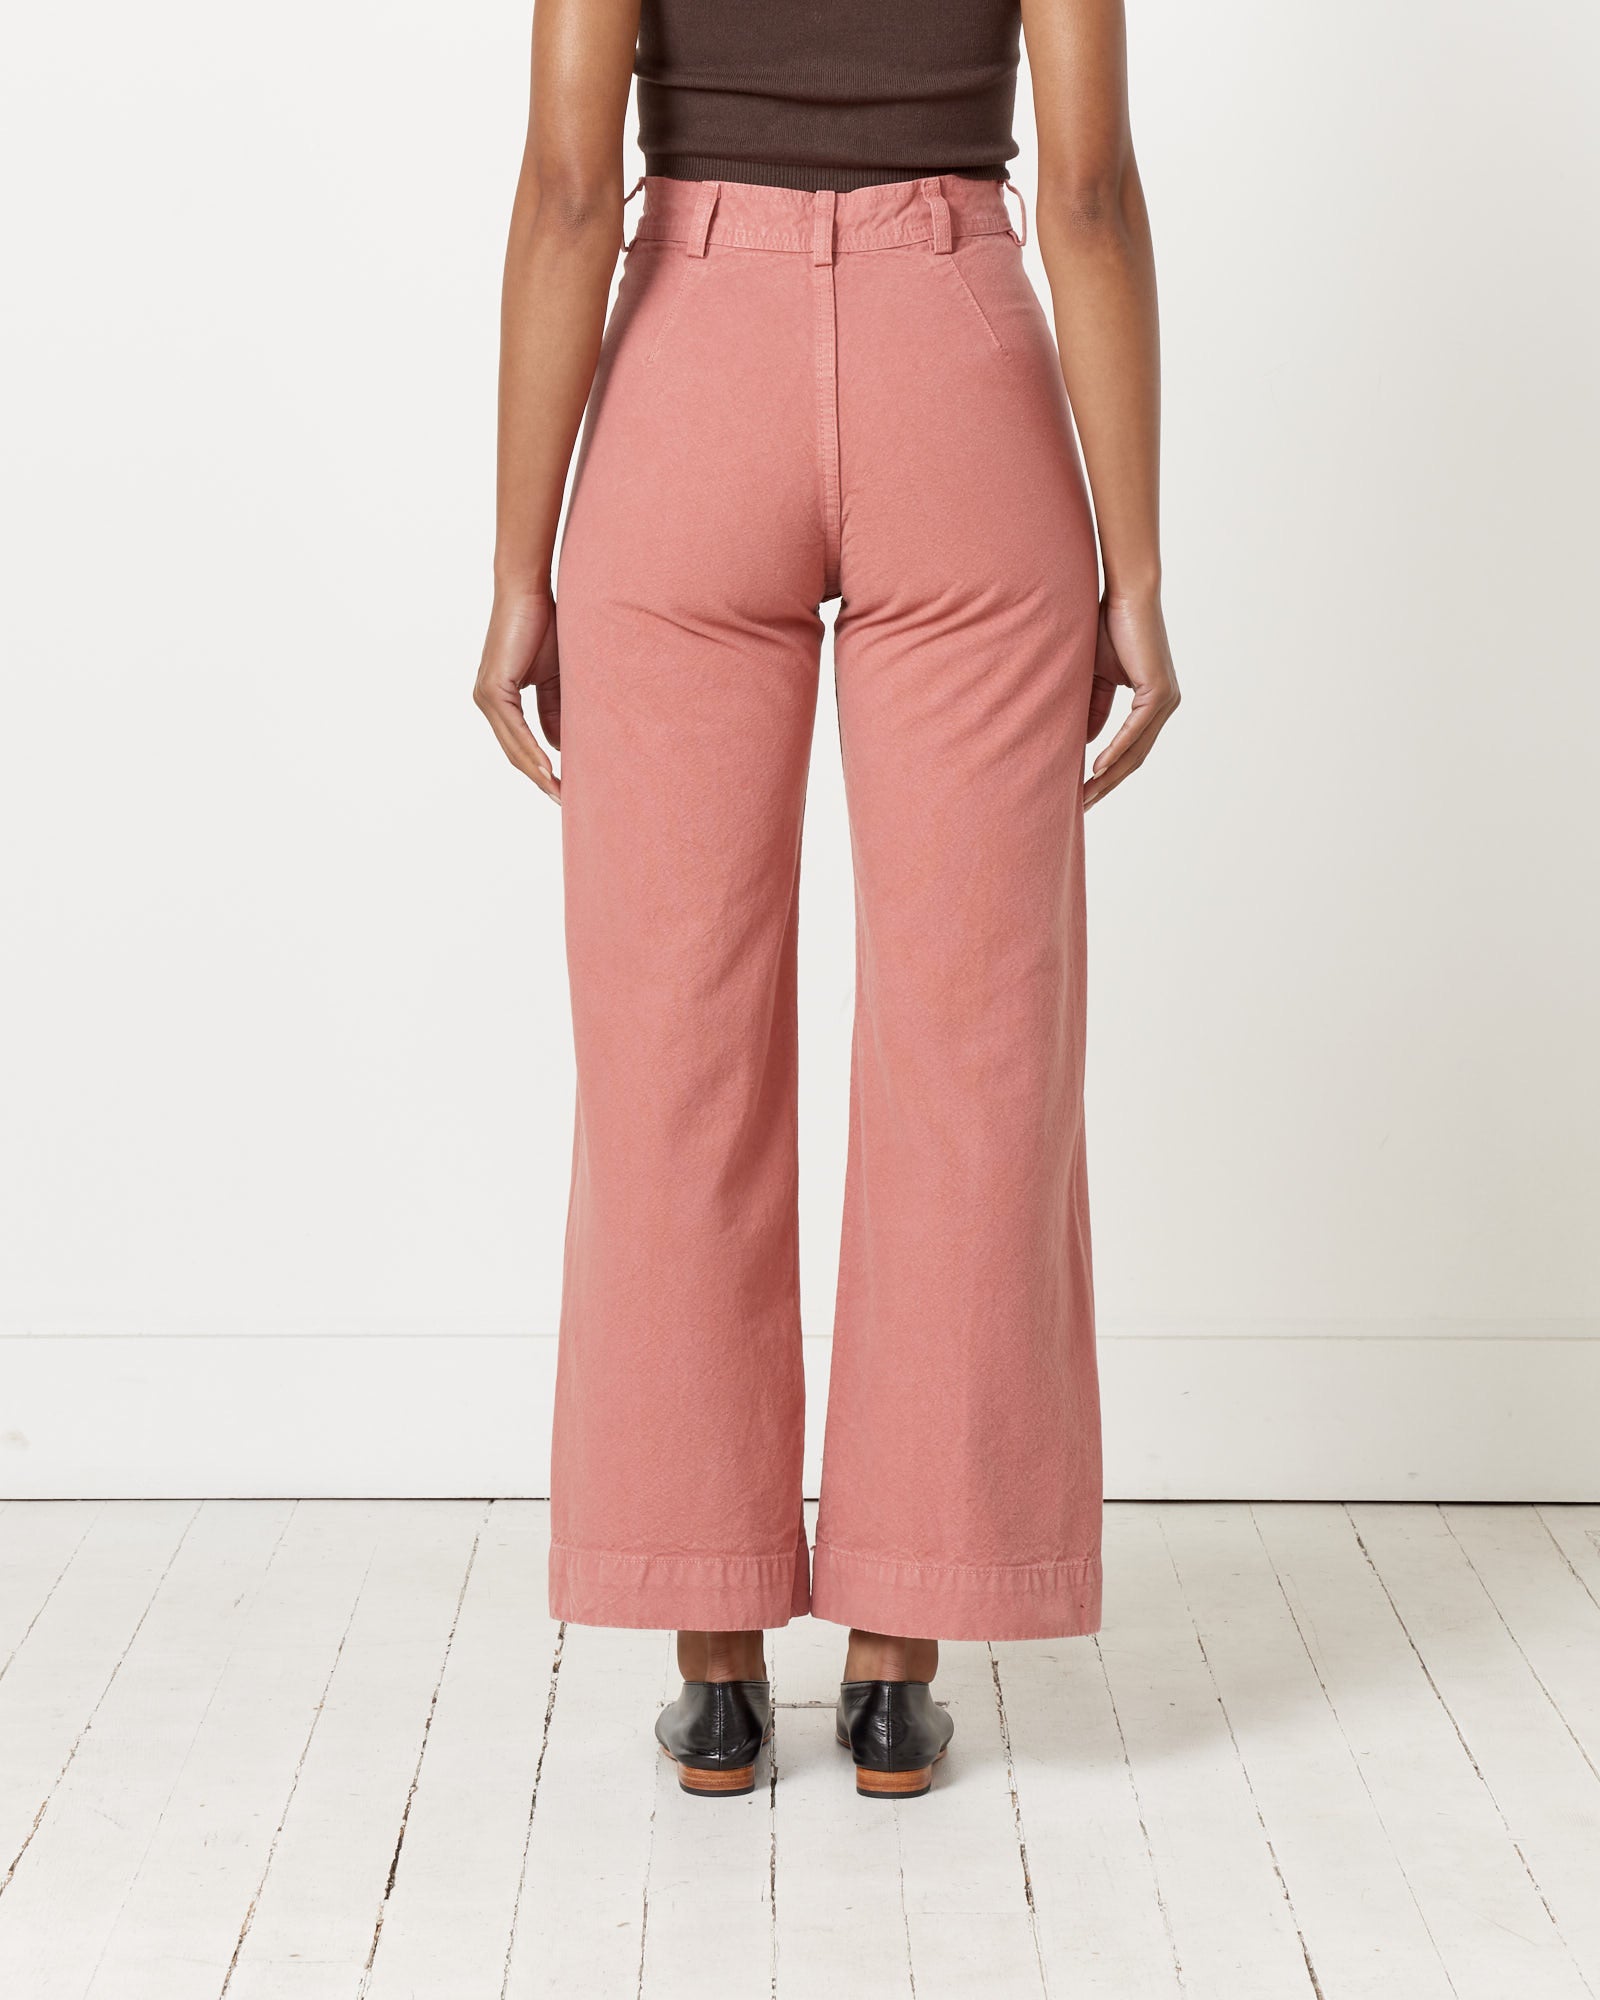 Sailor denim trouser in Rinse wash curated on LTK